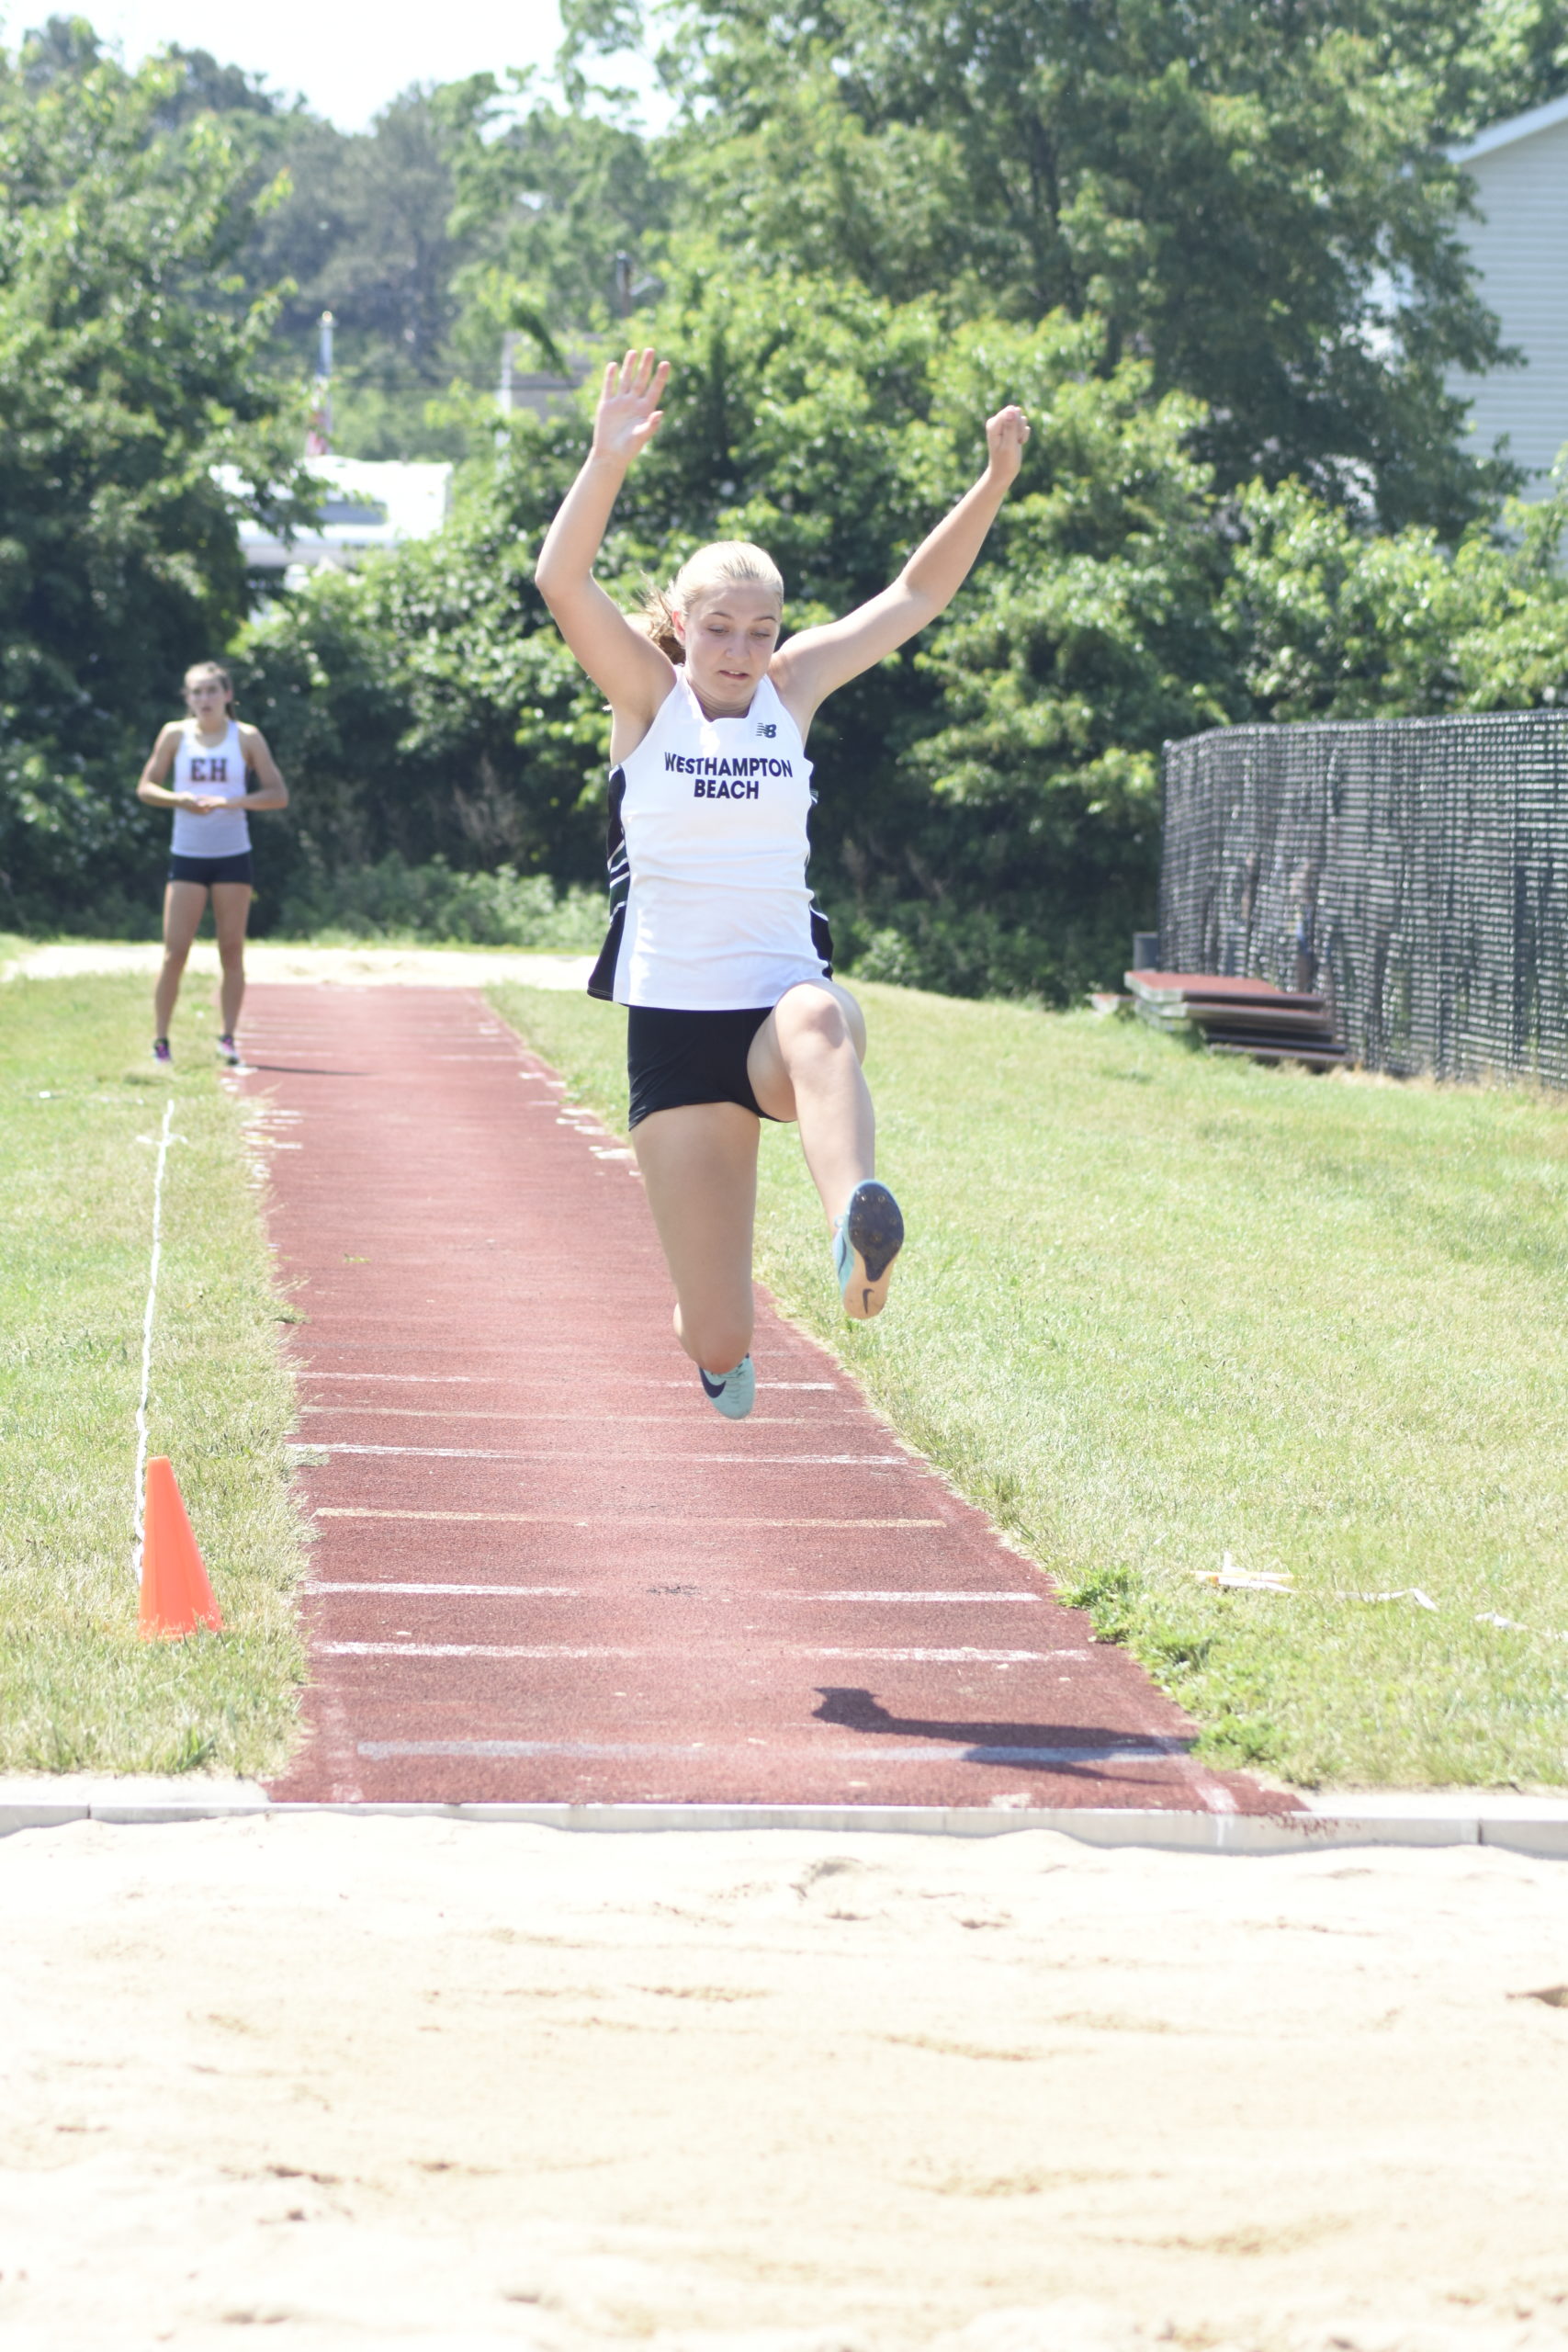 Westhampton Beach freshman Madison Phillips competing in the long jump portion of the pentathlon on June 6.